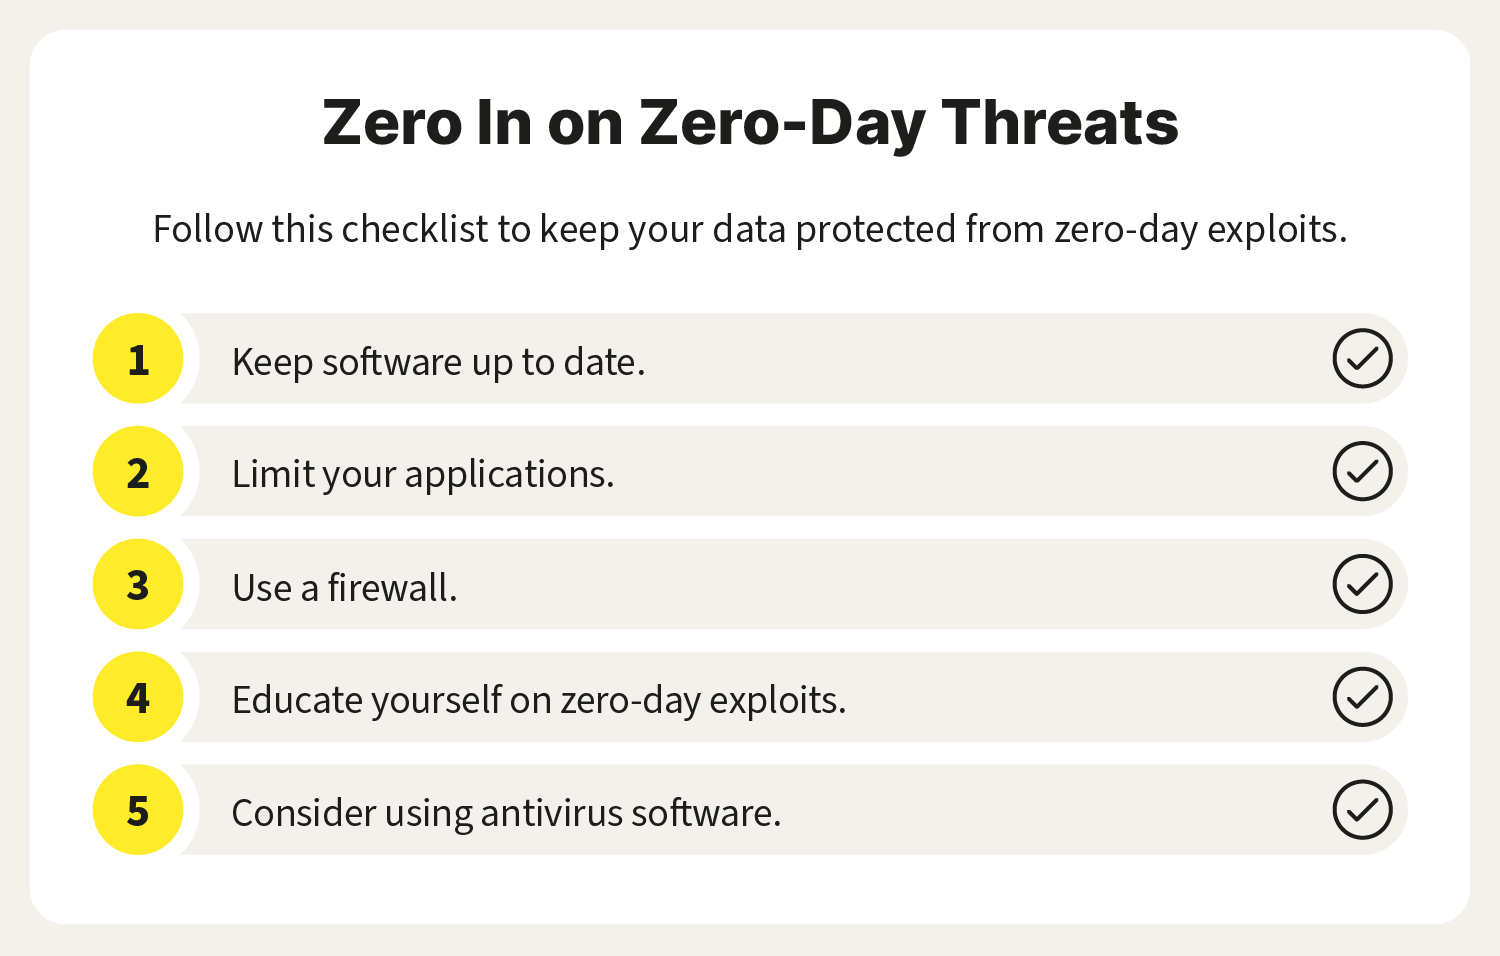 A graphic includes different zero-day exploit protection tips.